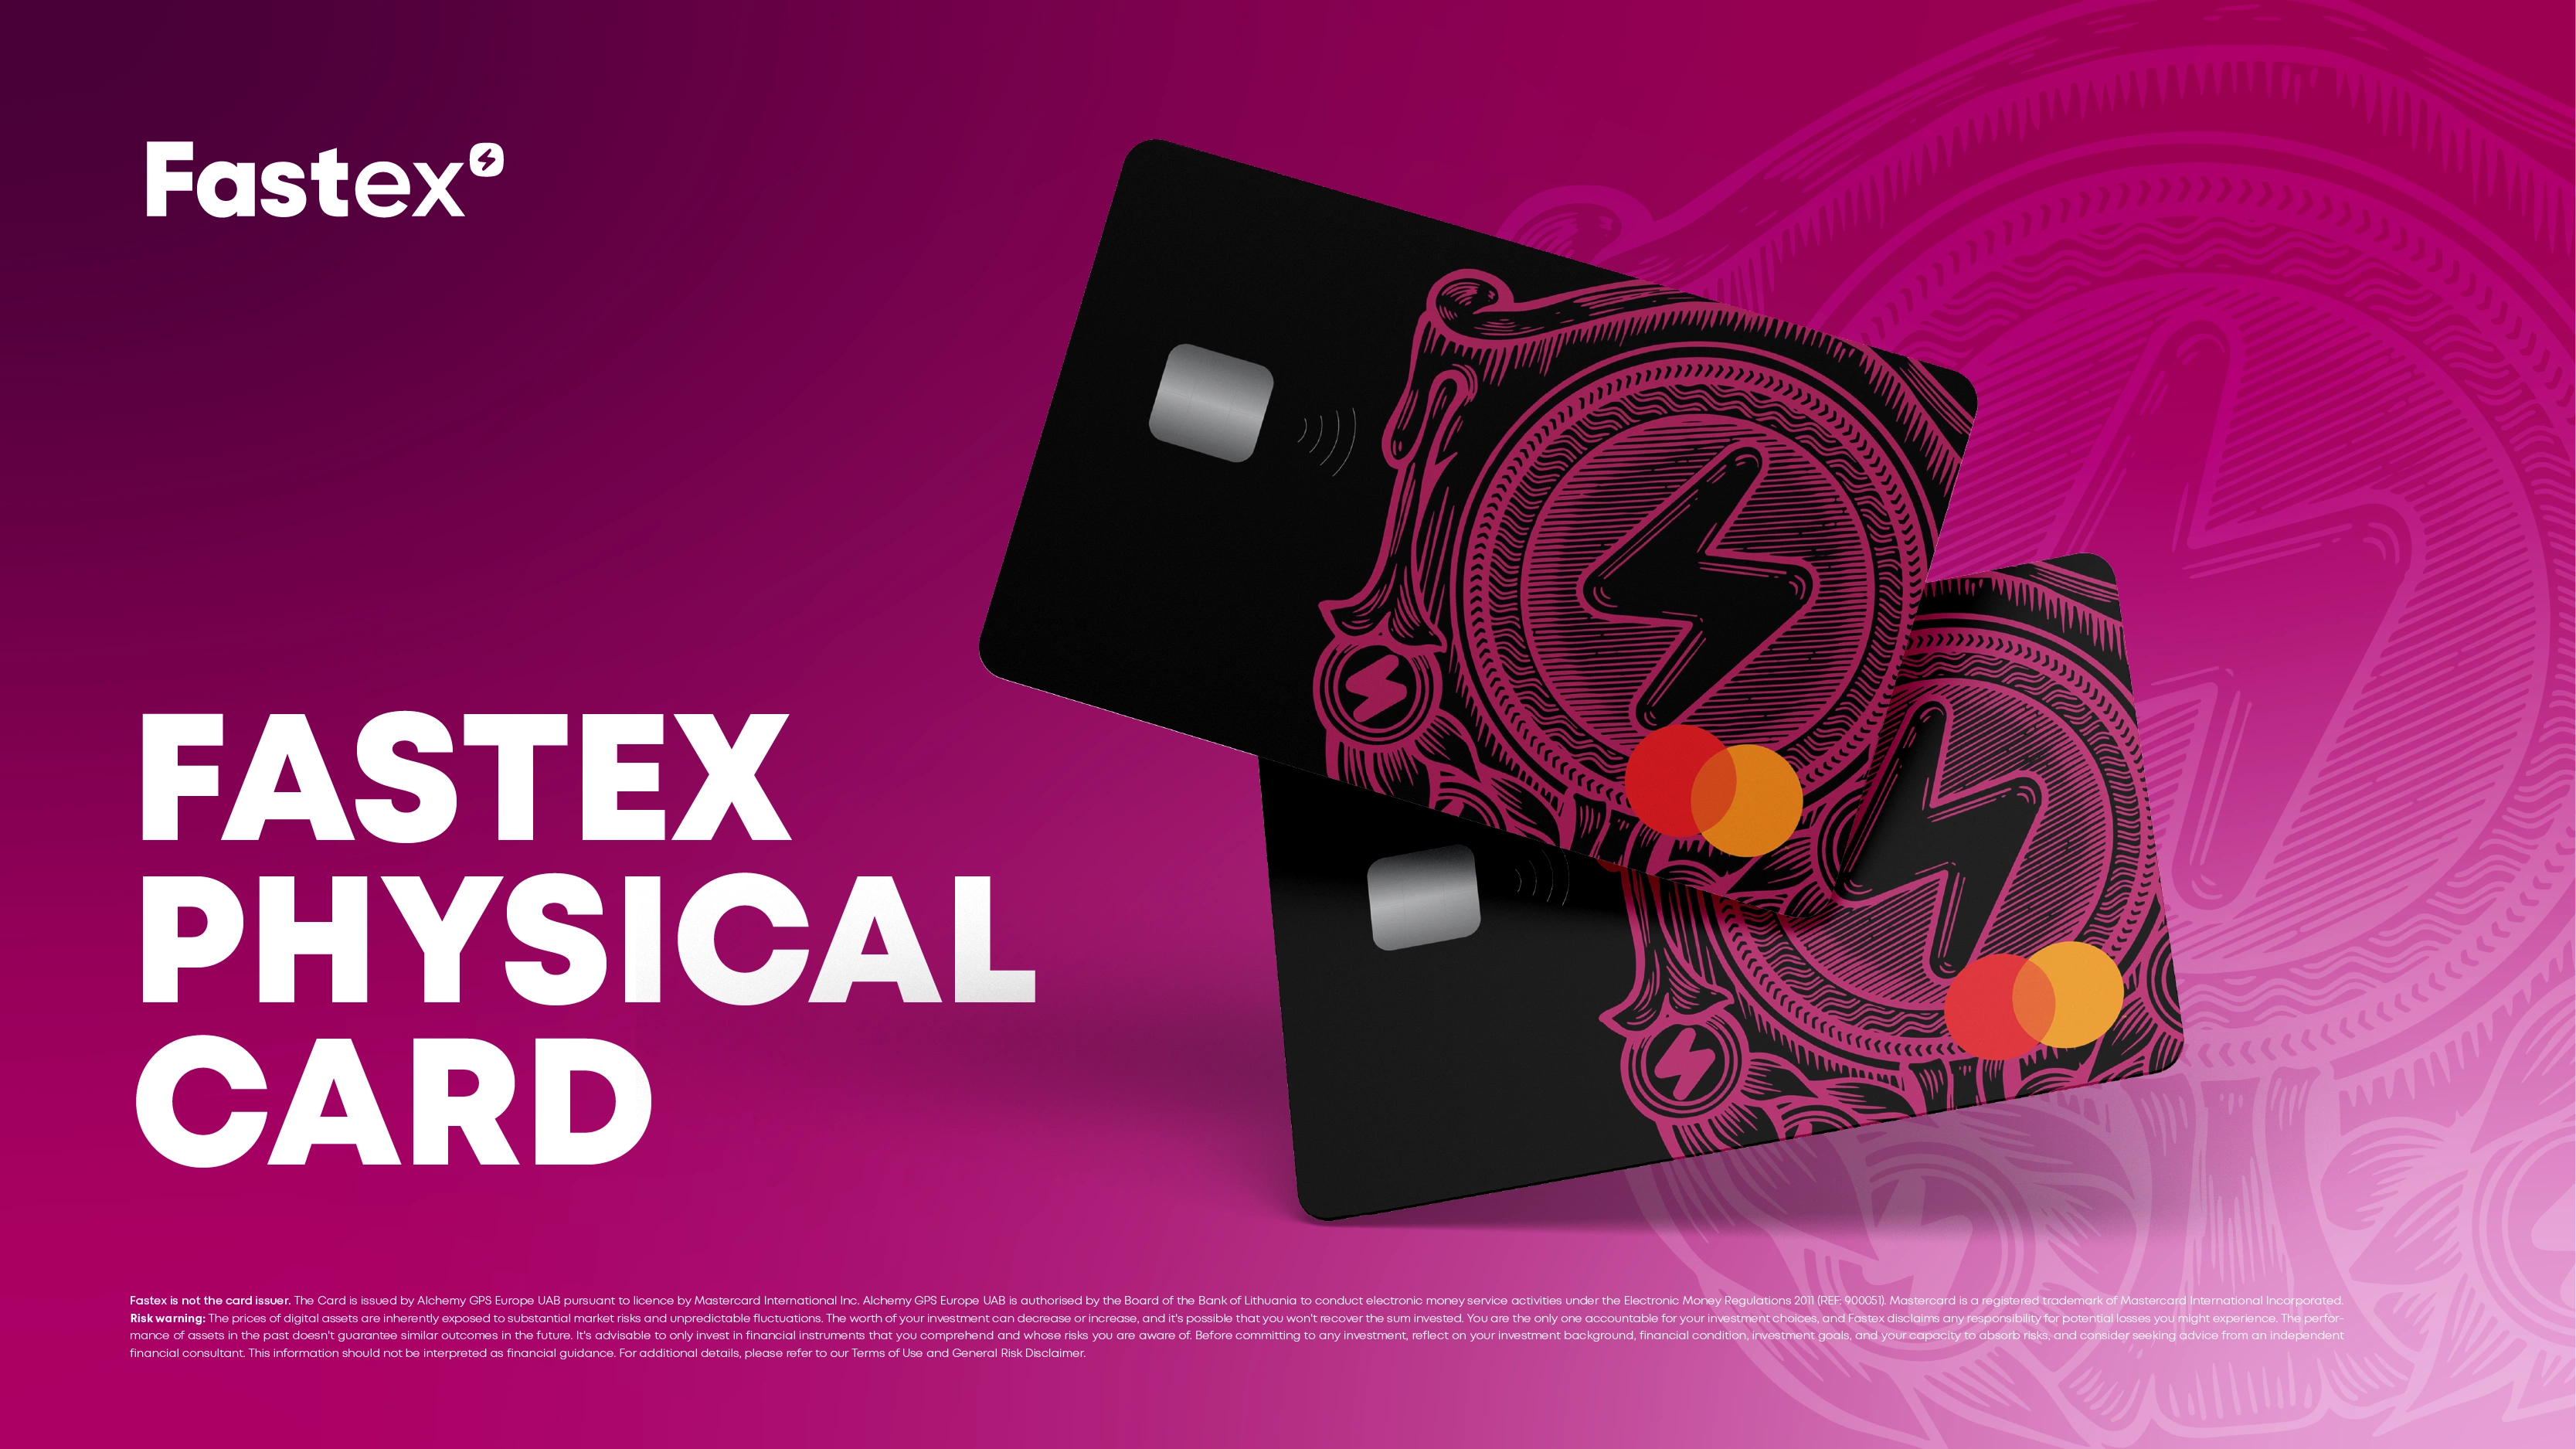 New Product Launch: Fastex Physical Card